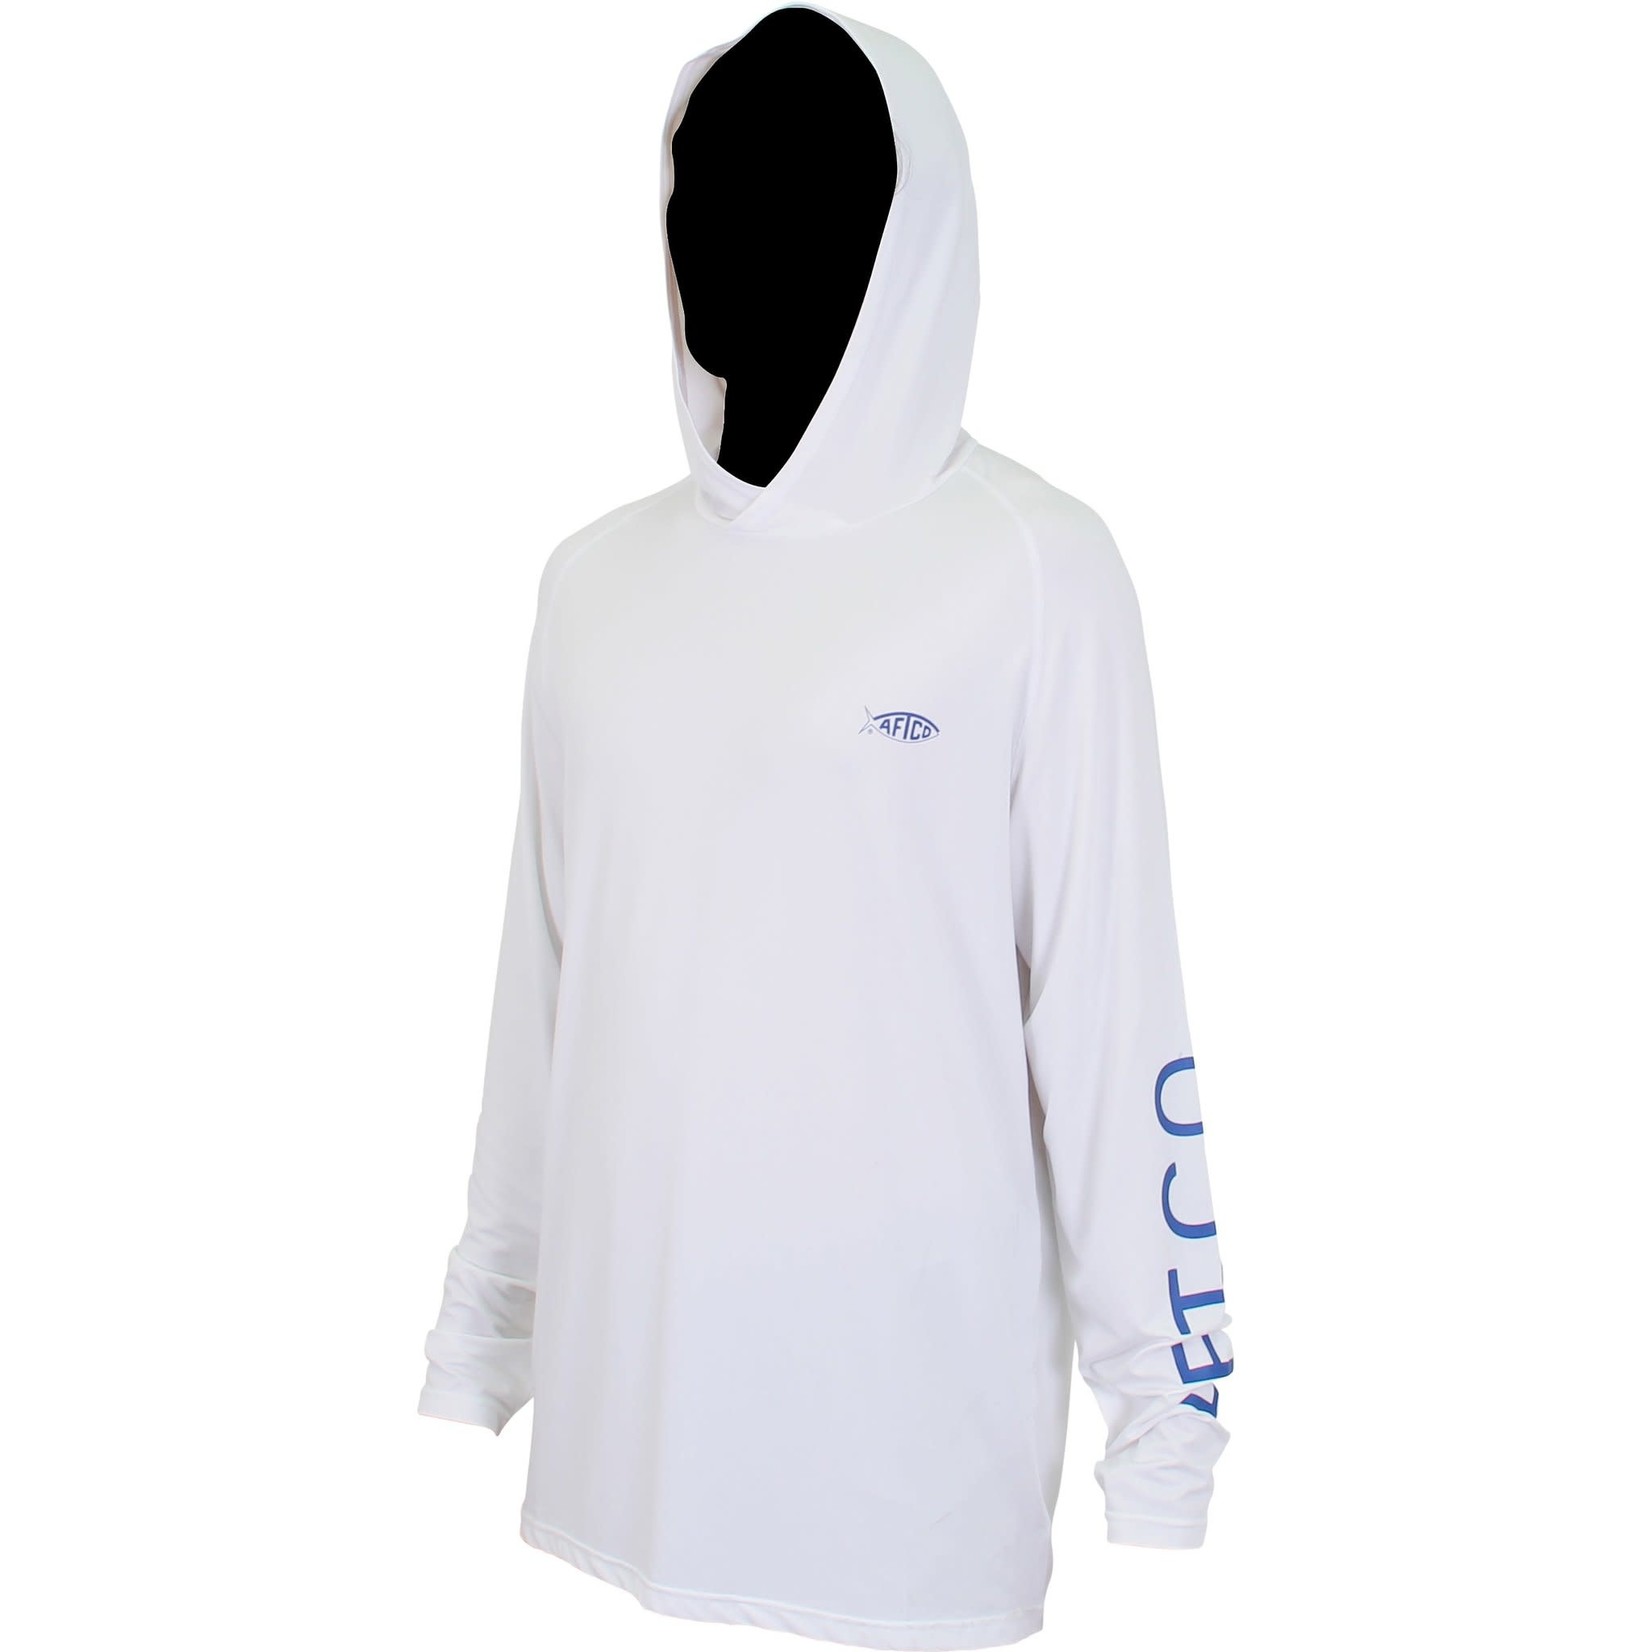 AFTCO AFTCO Samurai Hooded Long Sleeve Performance Shirt